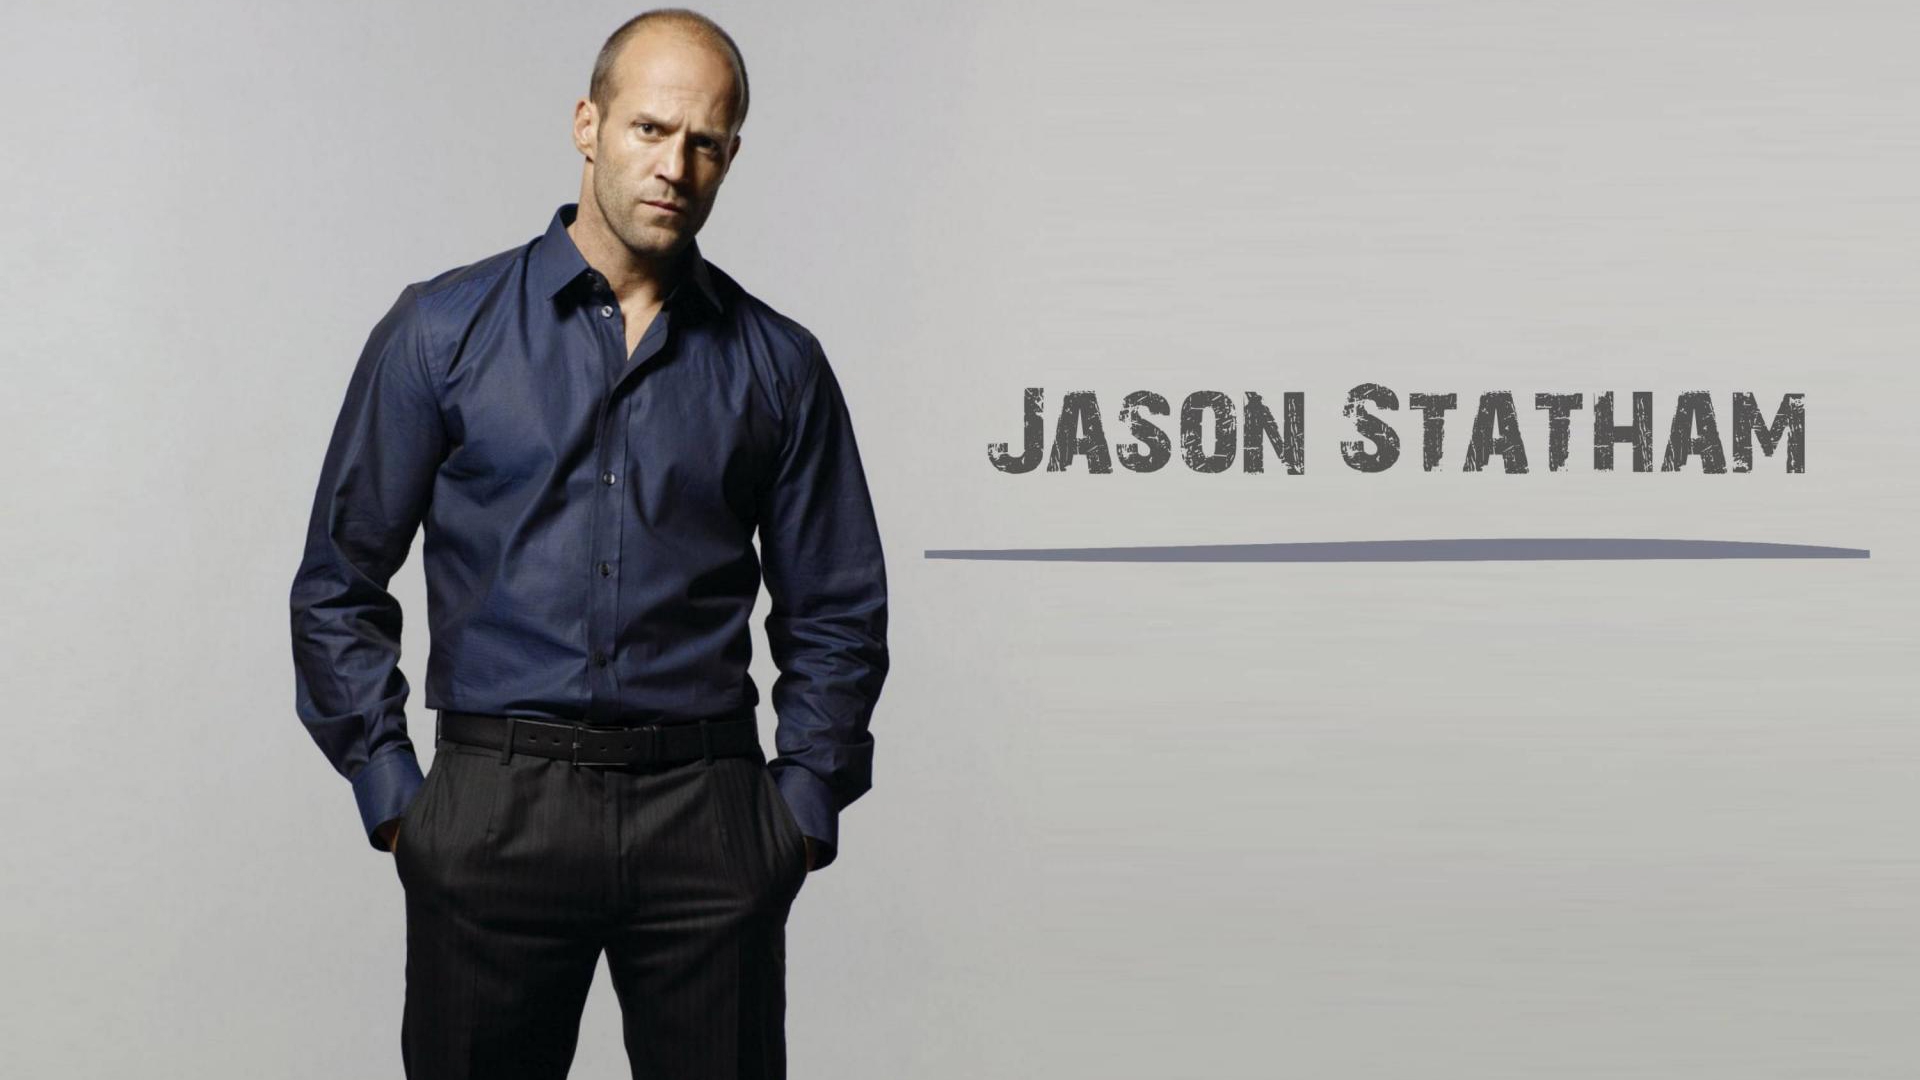 Jason Statham Poster High Definition Wallpapers HD wallpapers